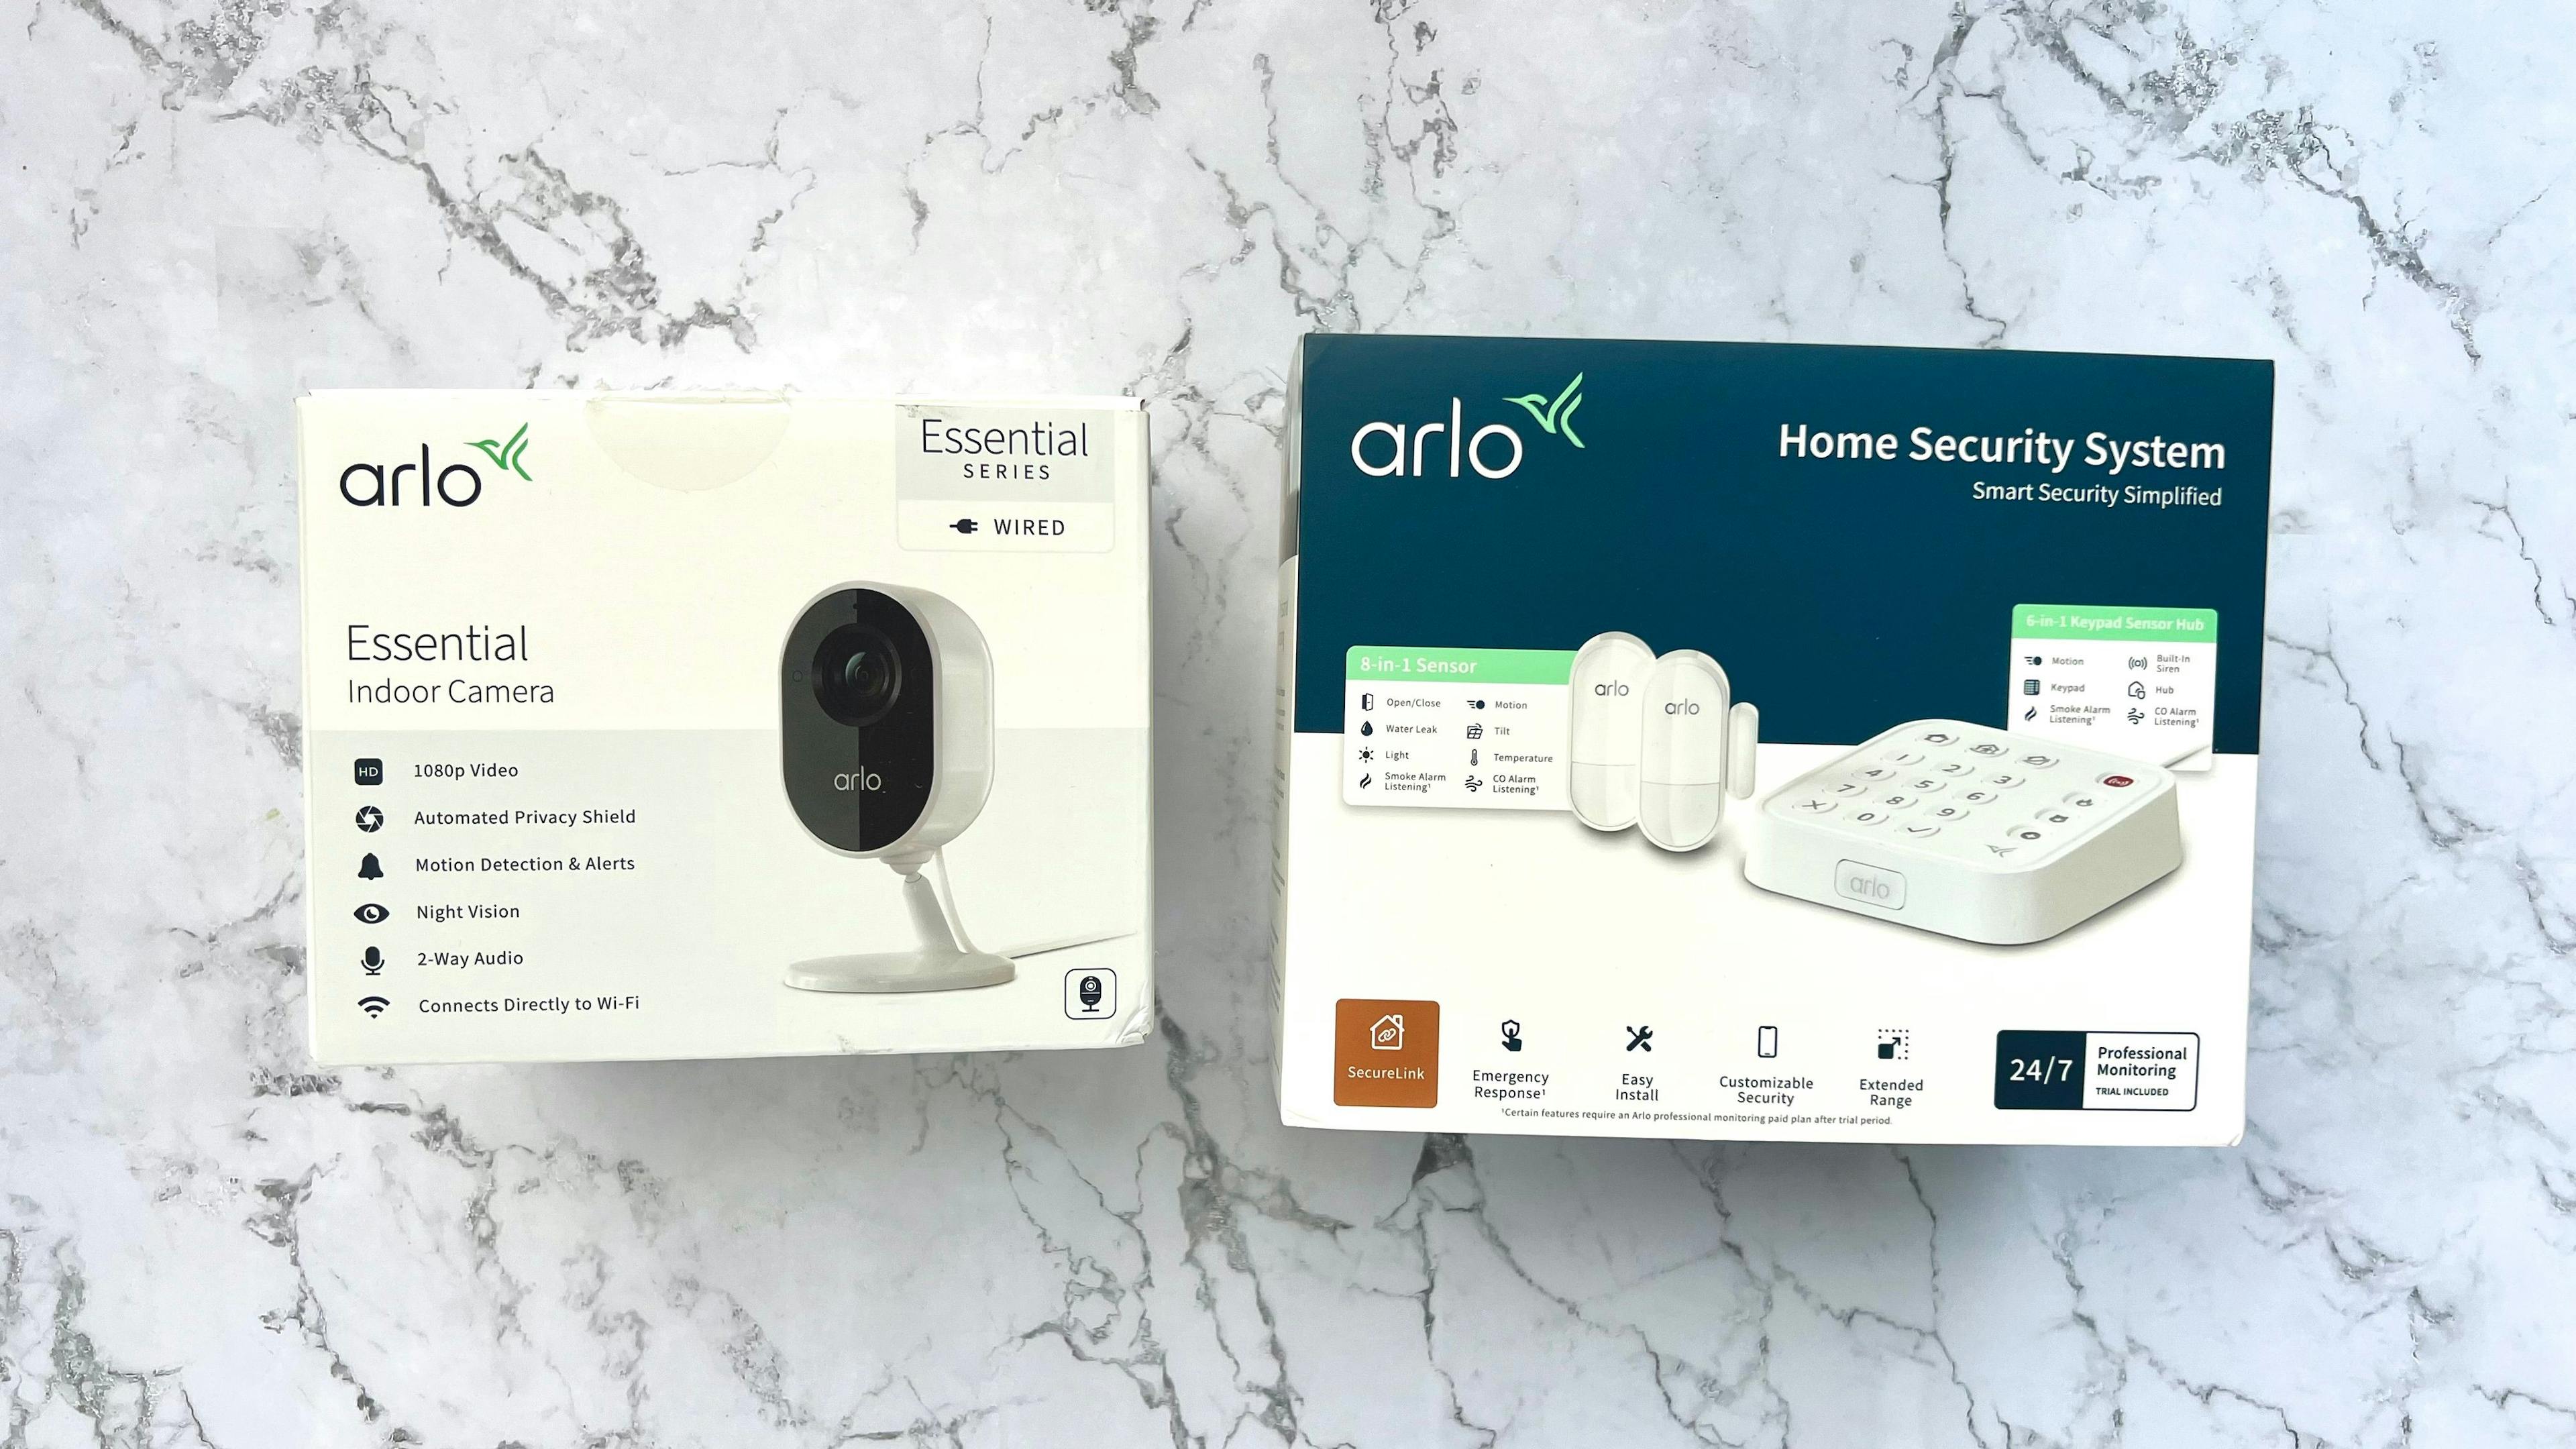 Arlo home security system and indoor camera on table